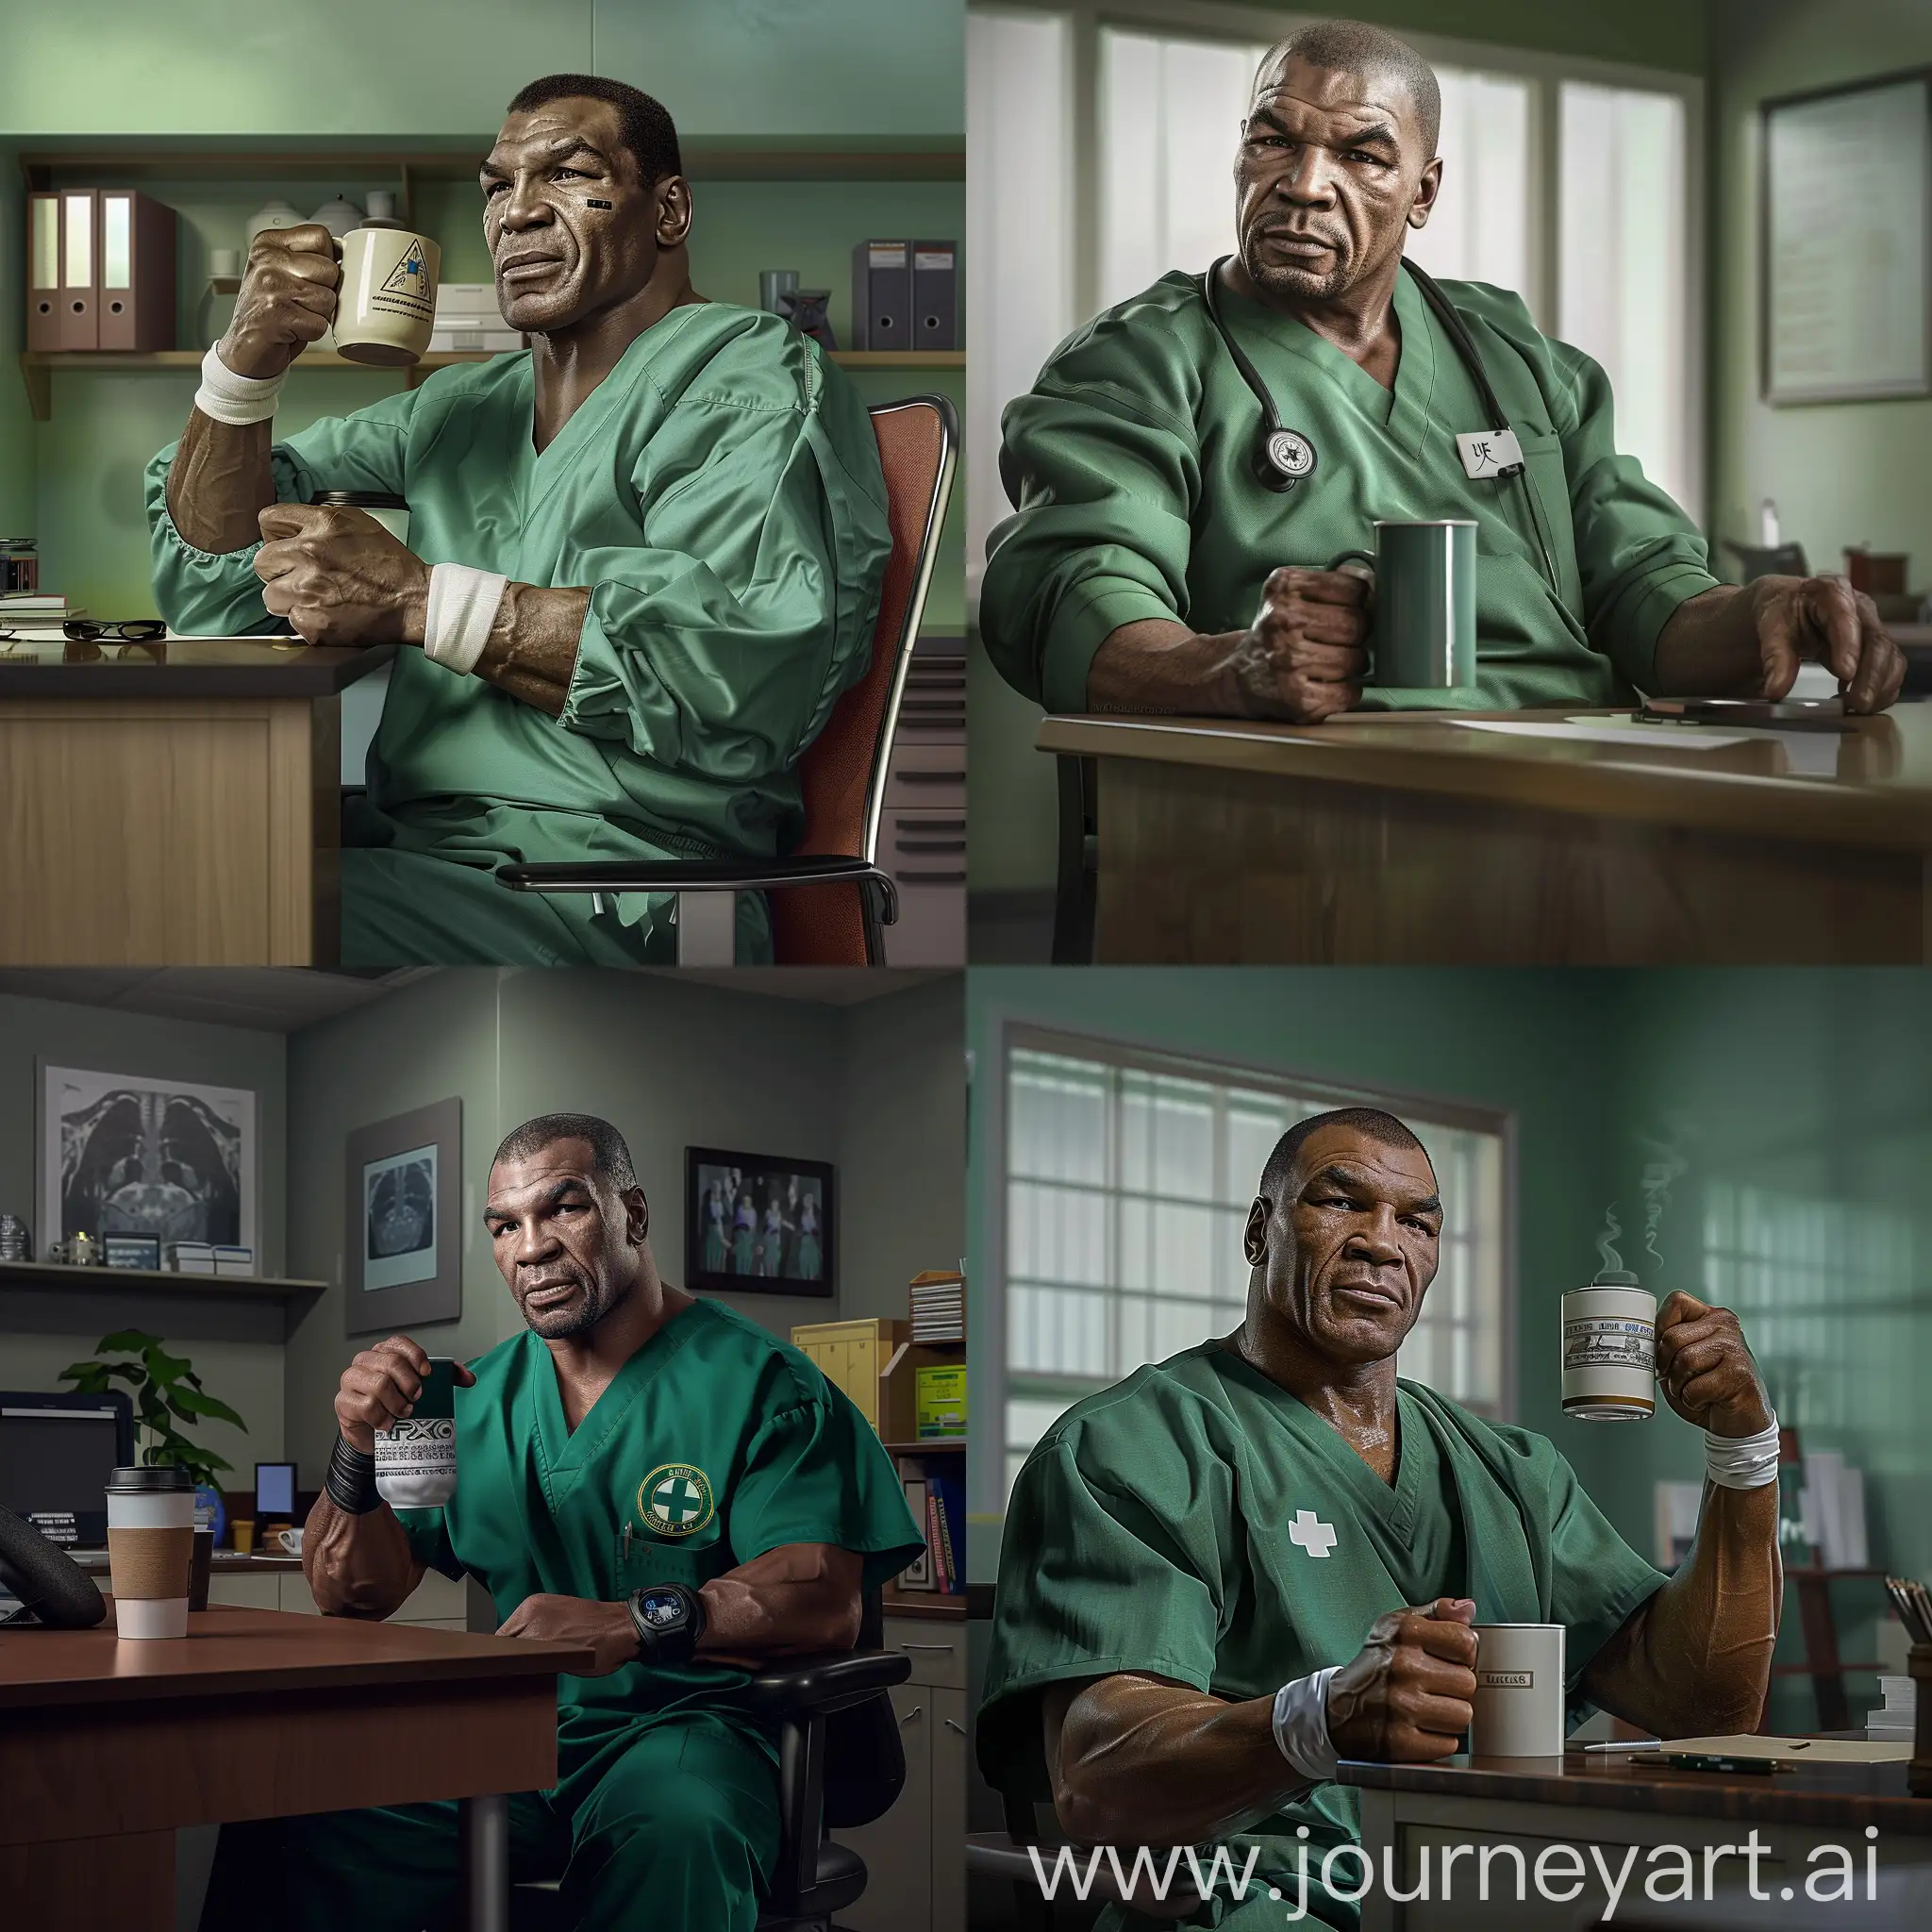 Mike Tyson in a green medical operating uniform is sitting at an office desk and holding a mug of coffee, portrait, photorealistic  